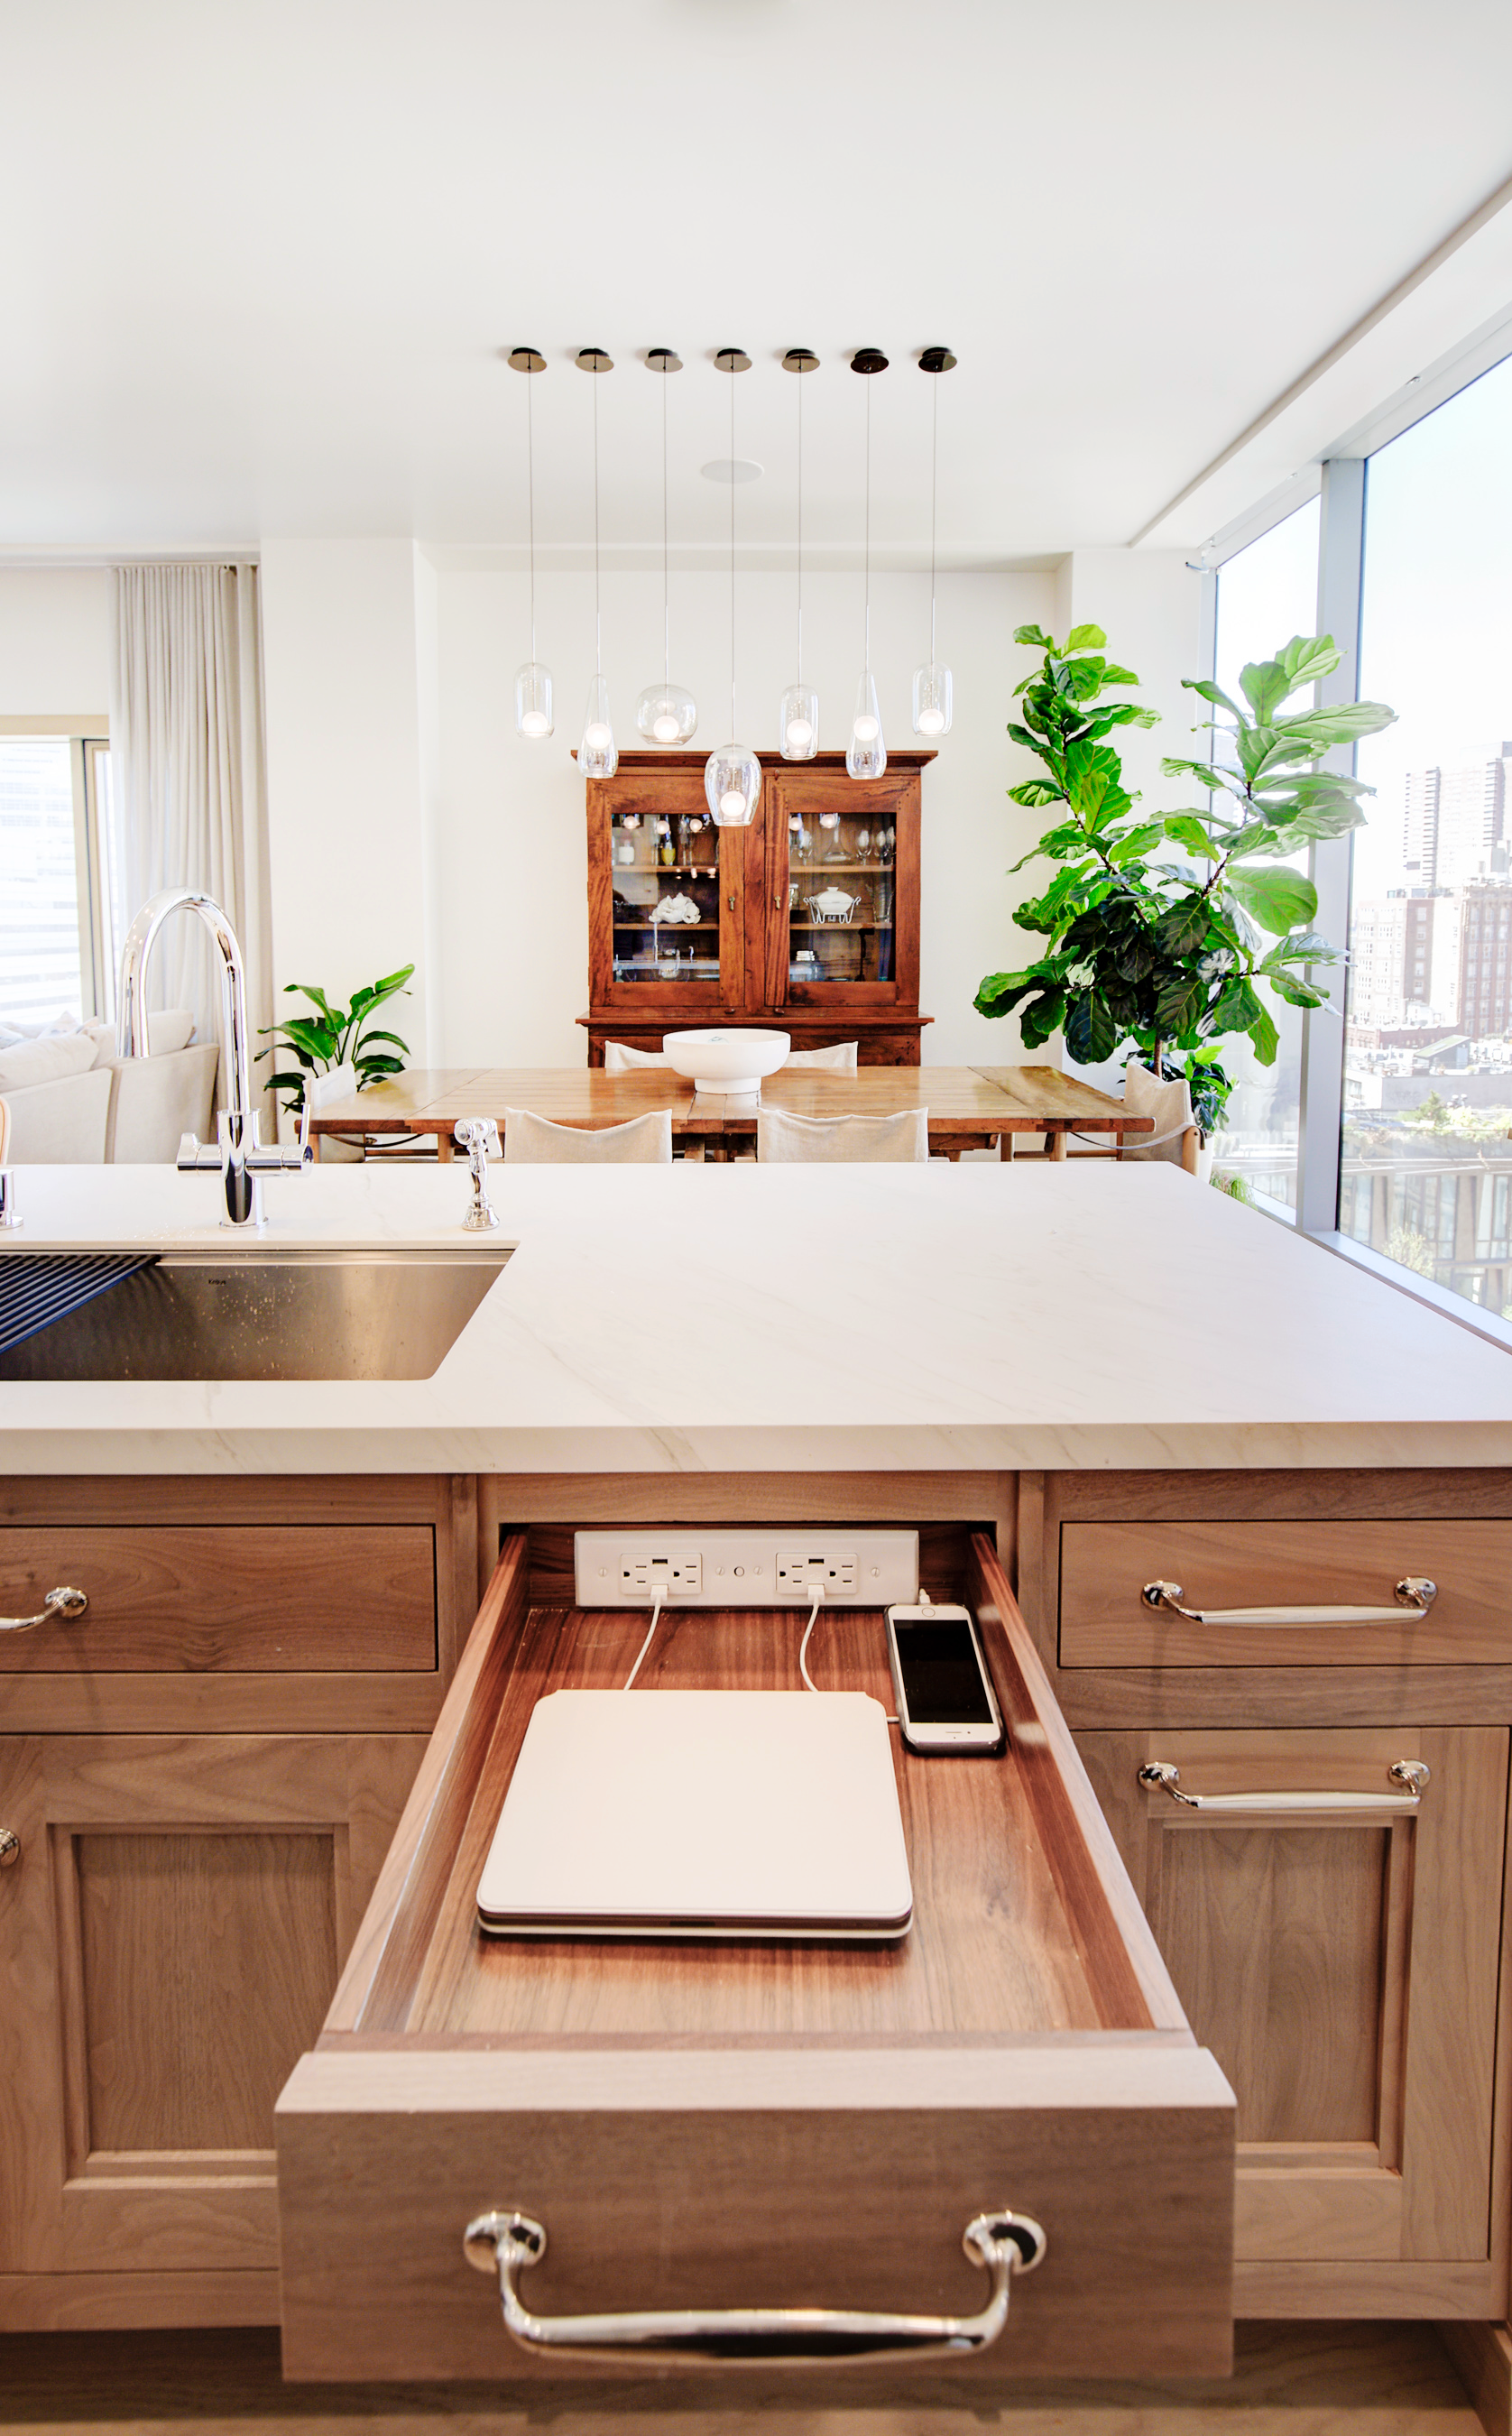 Make it Count: Smart Uses for the Space Below Upper Kitchen Cabinets